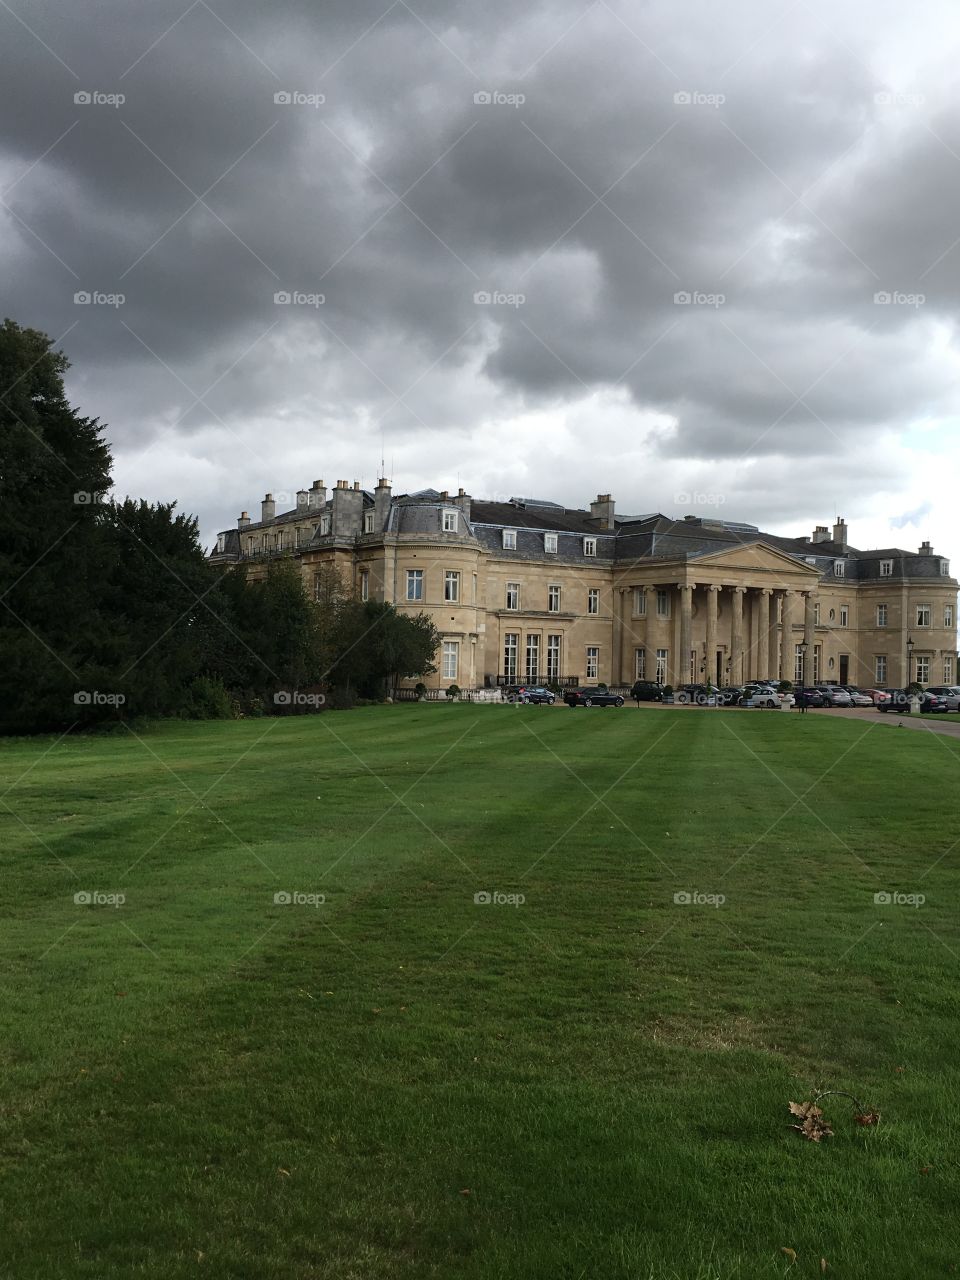 The Luton Hoo estate taken on a stormy day in England. A large yard with green grass and the mansion is all the way in the distance, next to some trees